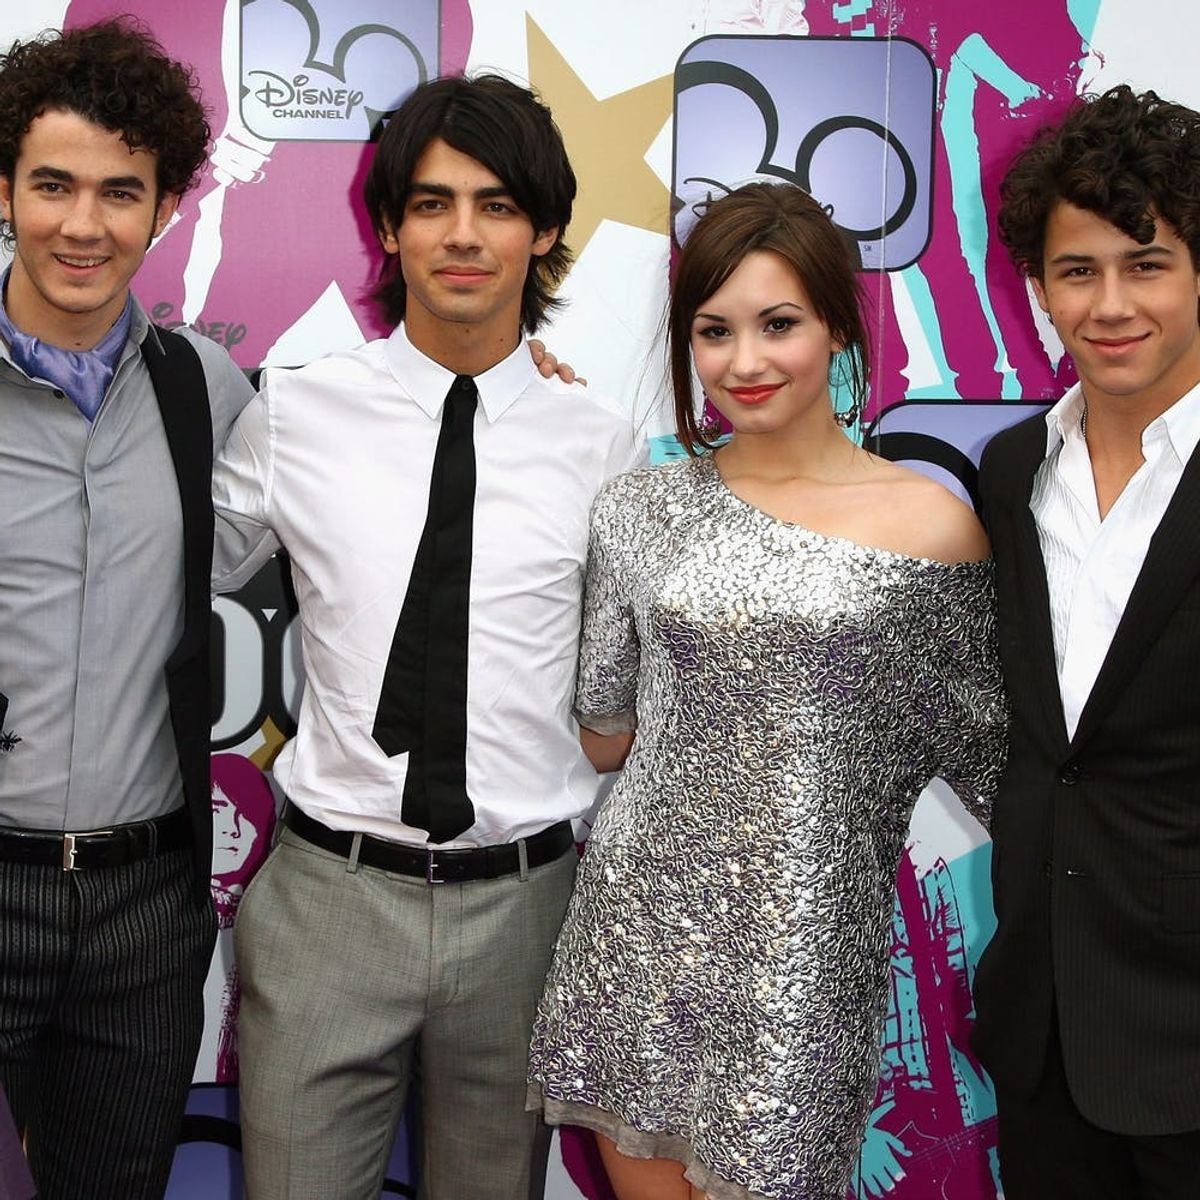 The ‘Camp Rock’ Cast’s 10th Anniversary Tweets Are Making Us Seriously Nostalgic